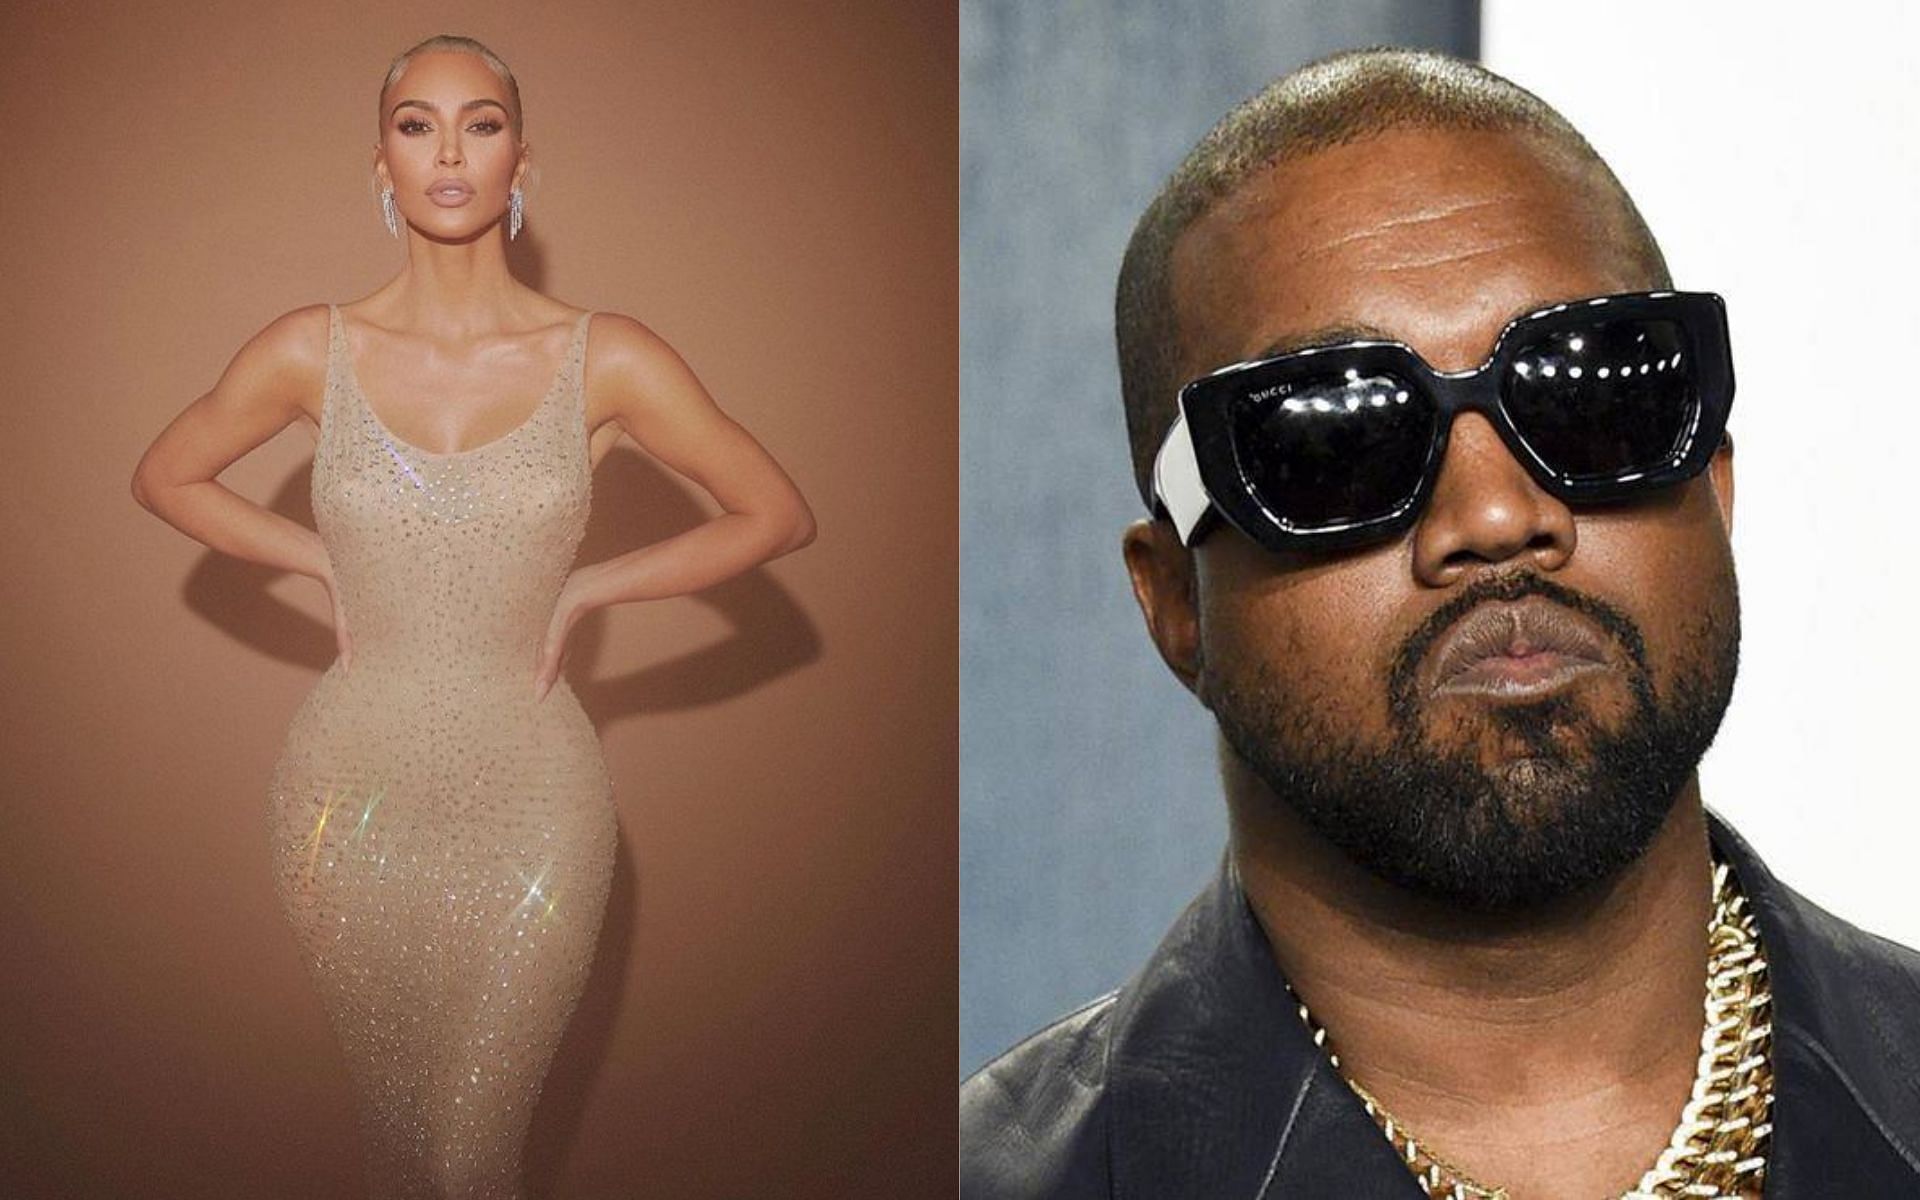 Kanye West will be seen releasing a new song about Kim Kardashian (Images via kimkardashian/Instagram and AP Images)